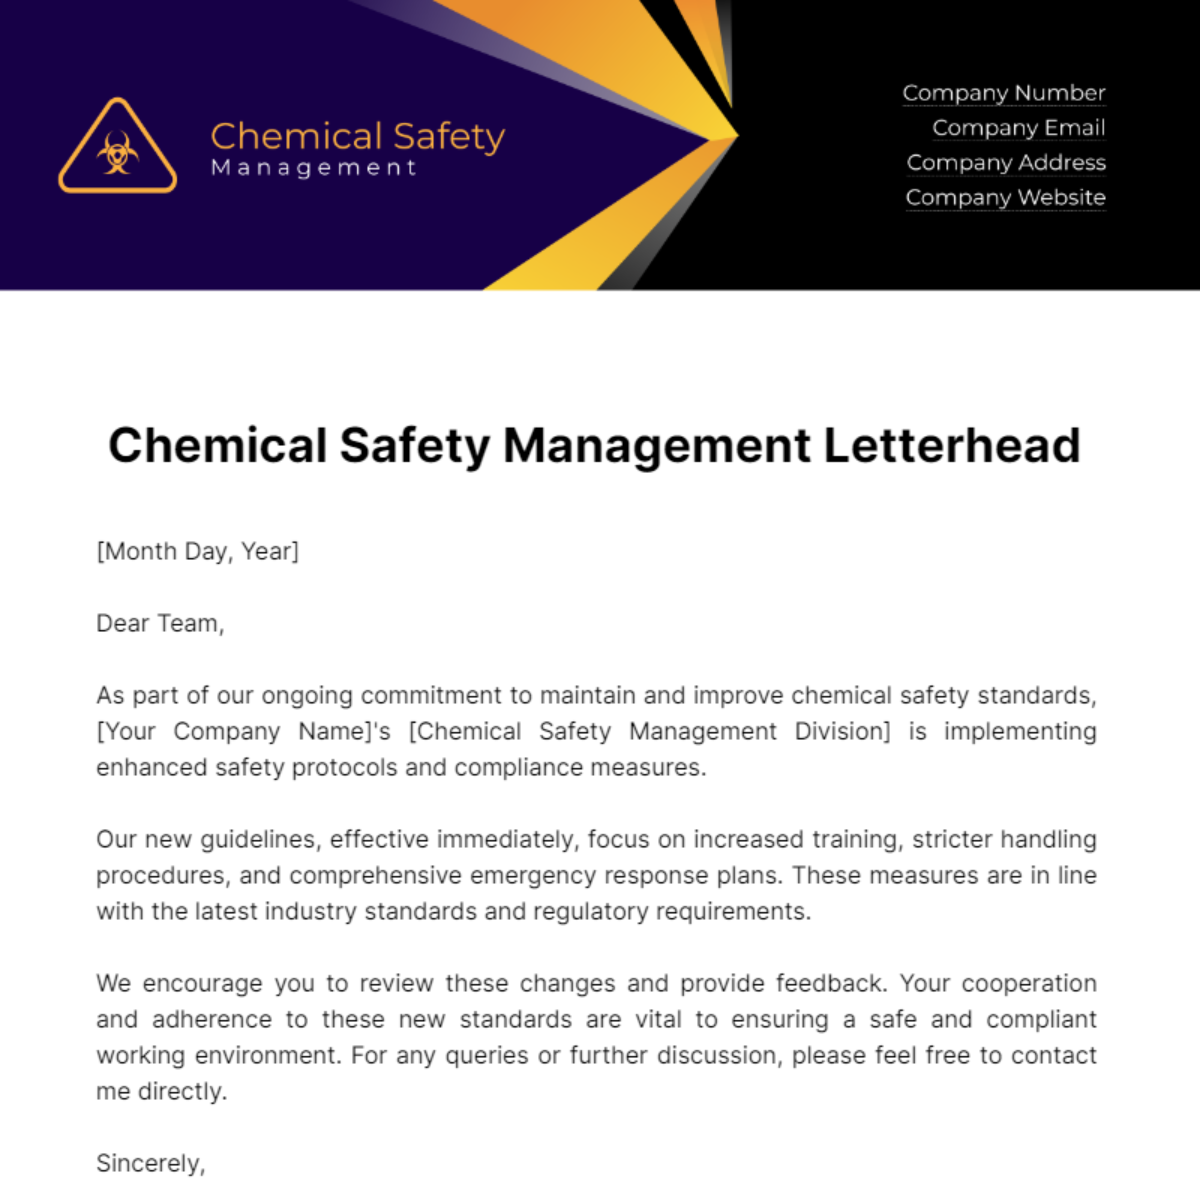 Chemical Safety Management Letterhead Template